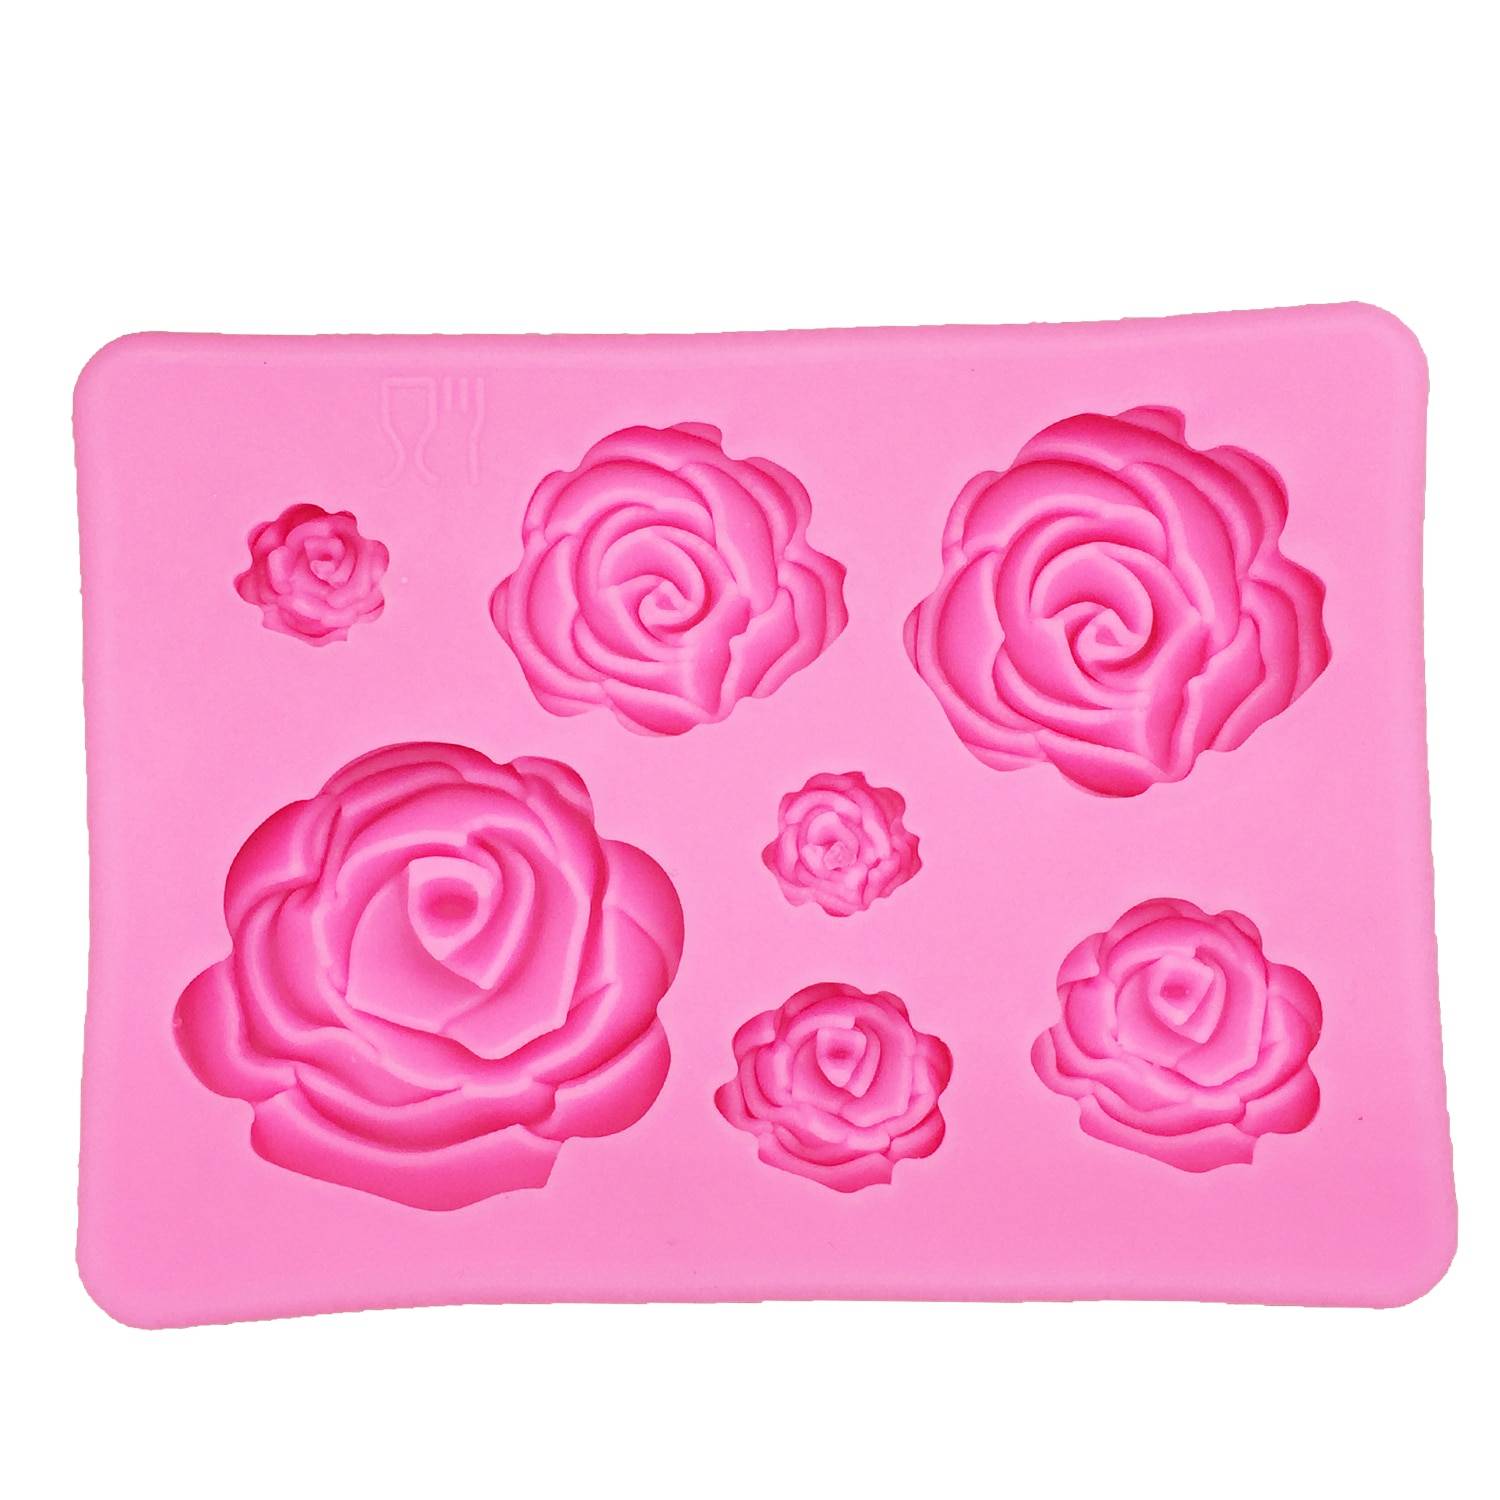 Rose Flowers Shaped Silicone Cake Mold Bakeware Kitchen Accessories